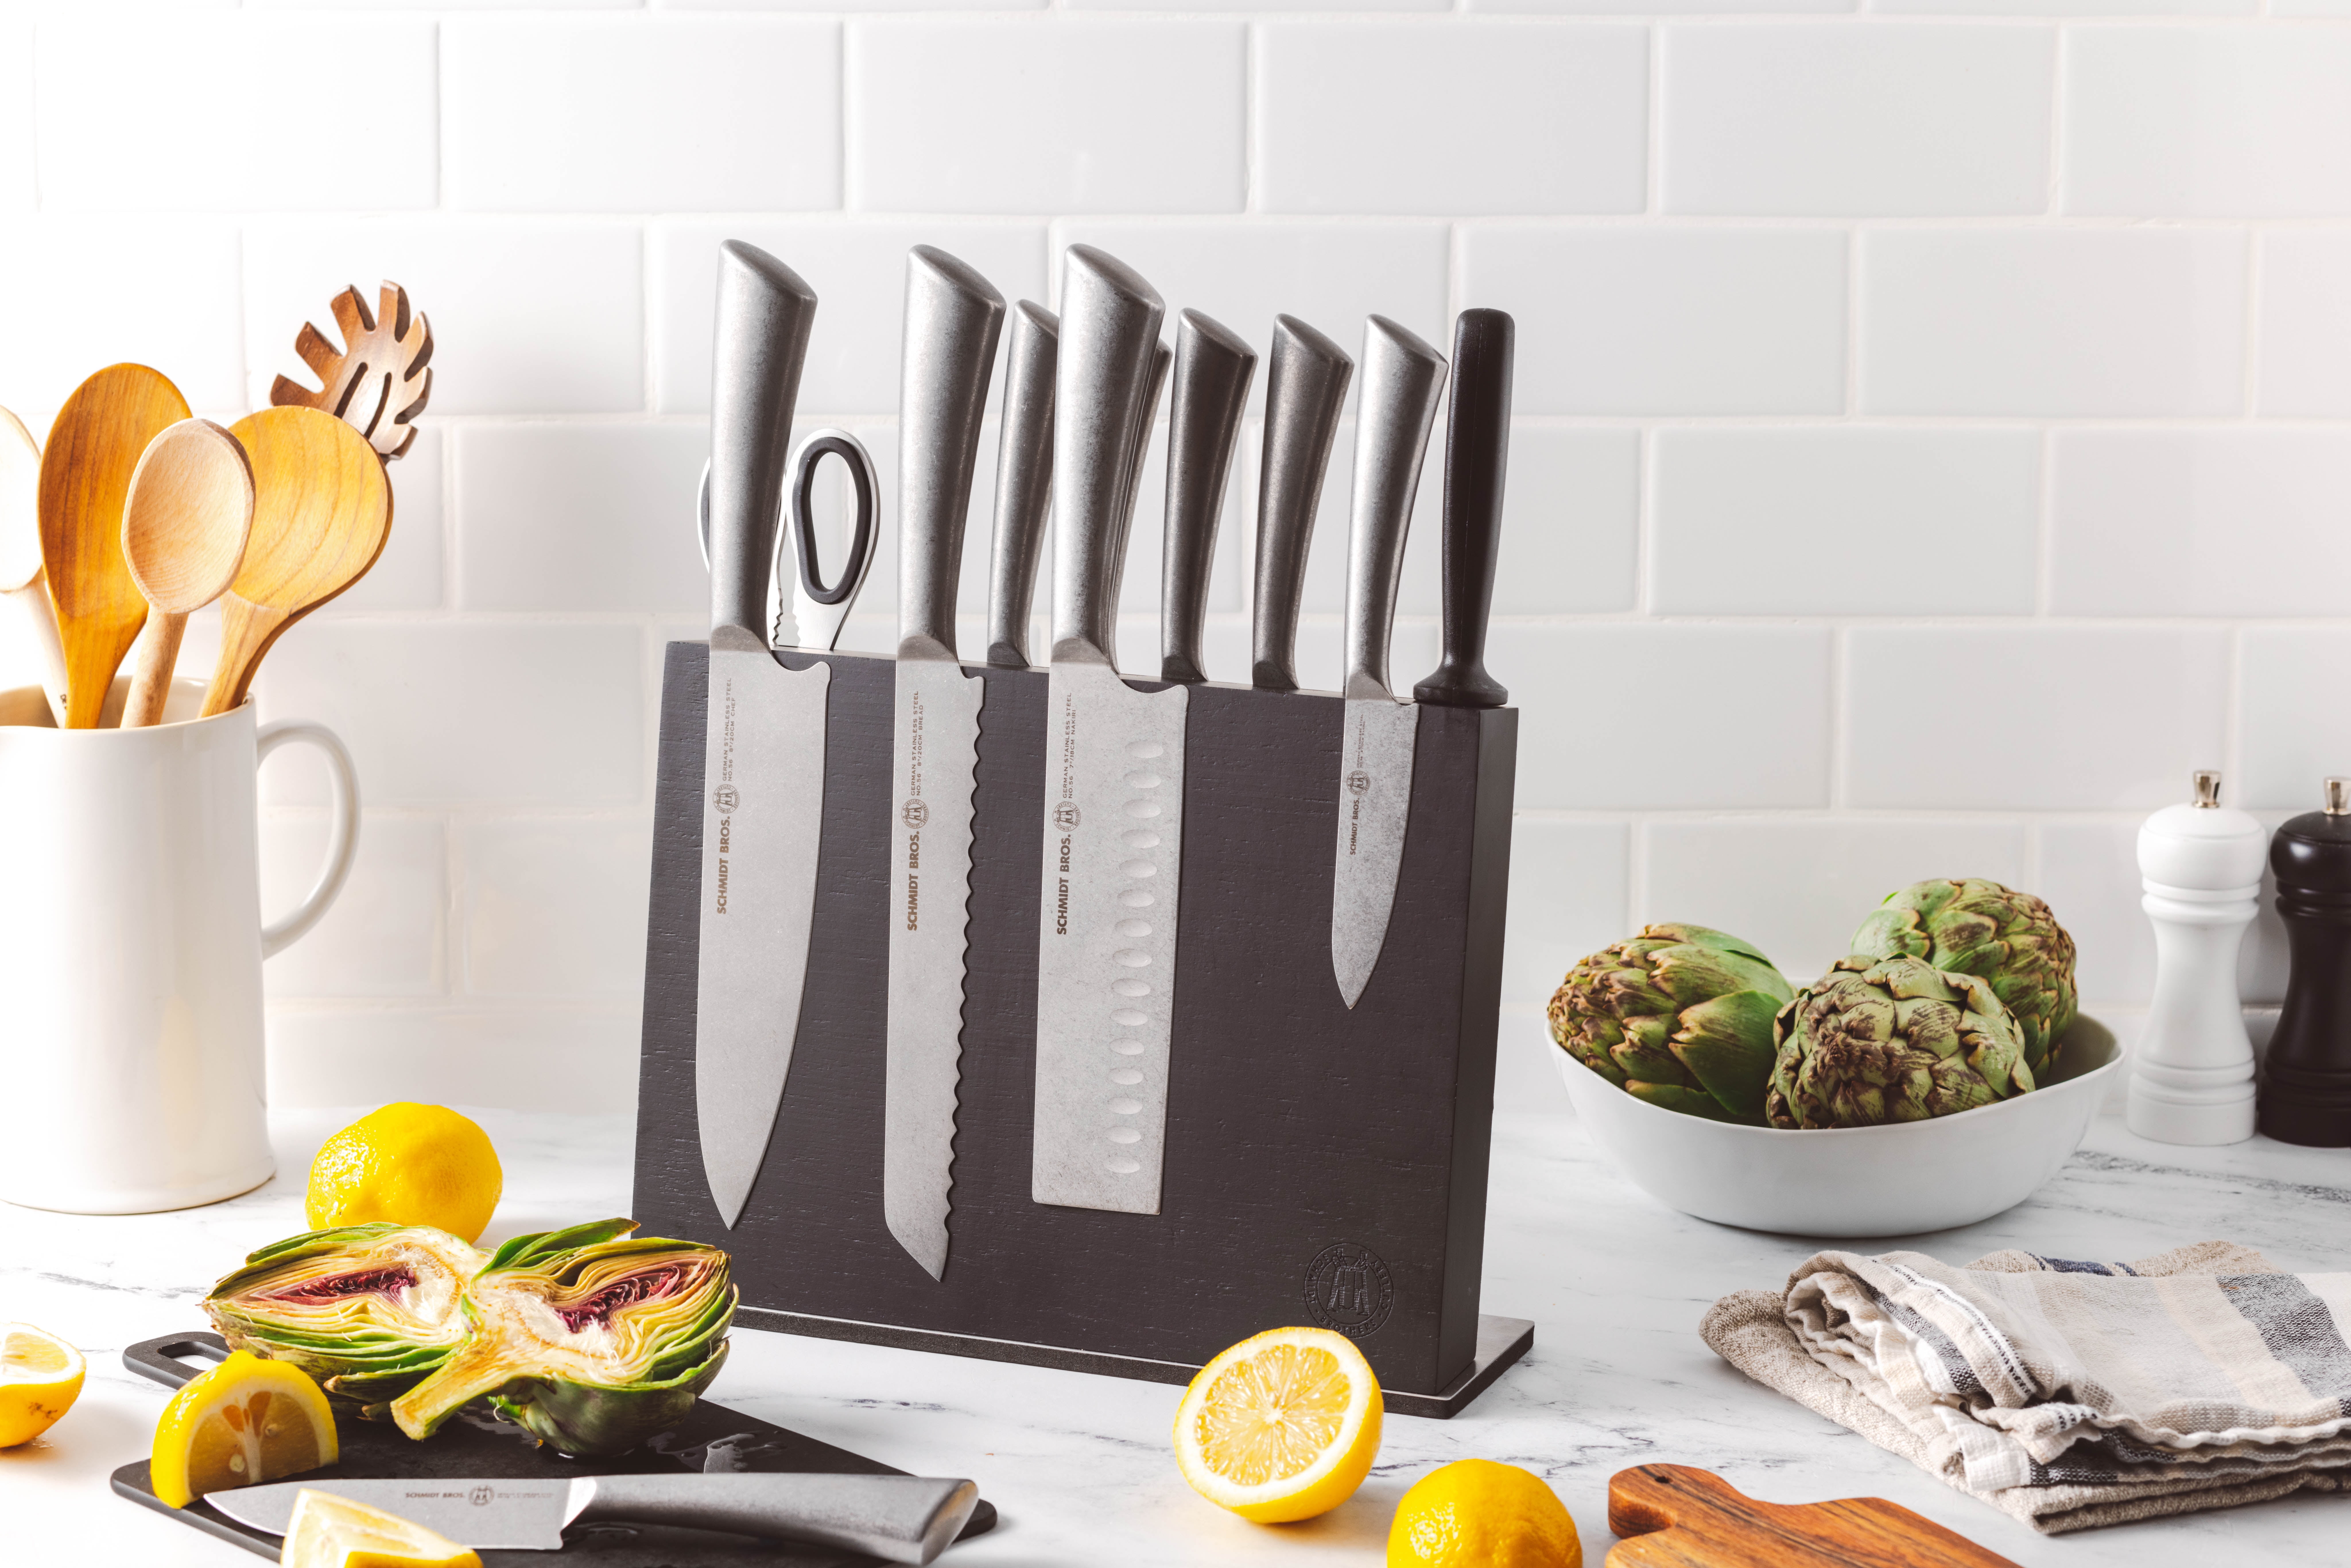 Schmidt Brothers Cutlery 14 PC Professional Series Forged Stainless Steel Knife Block Set; White Handles; Premium German Stainless Steel